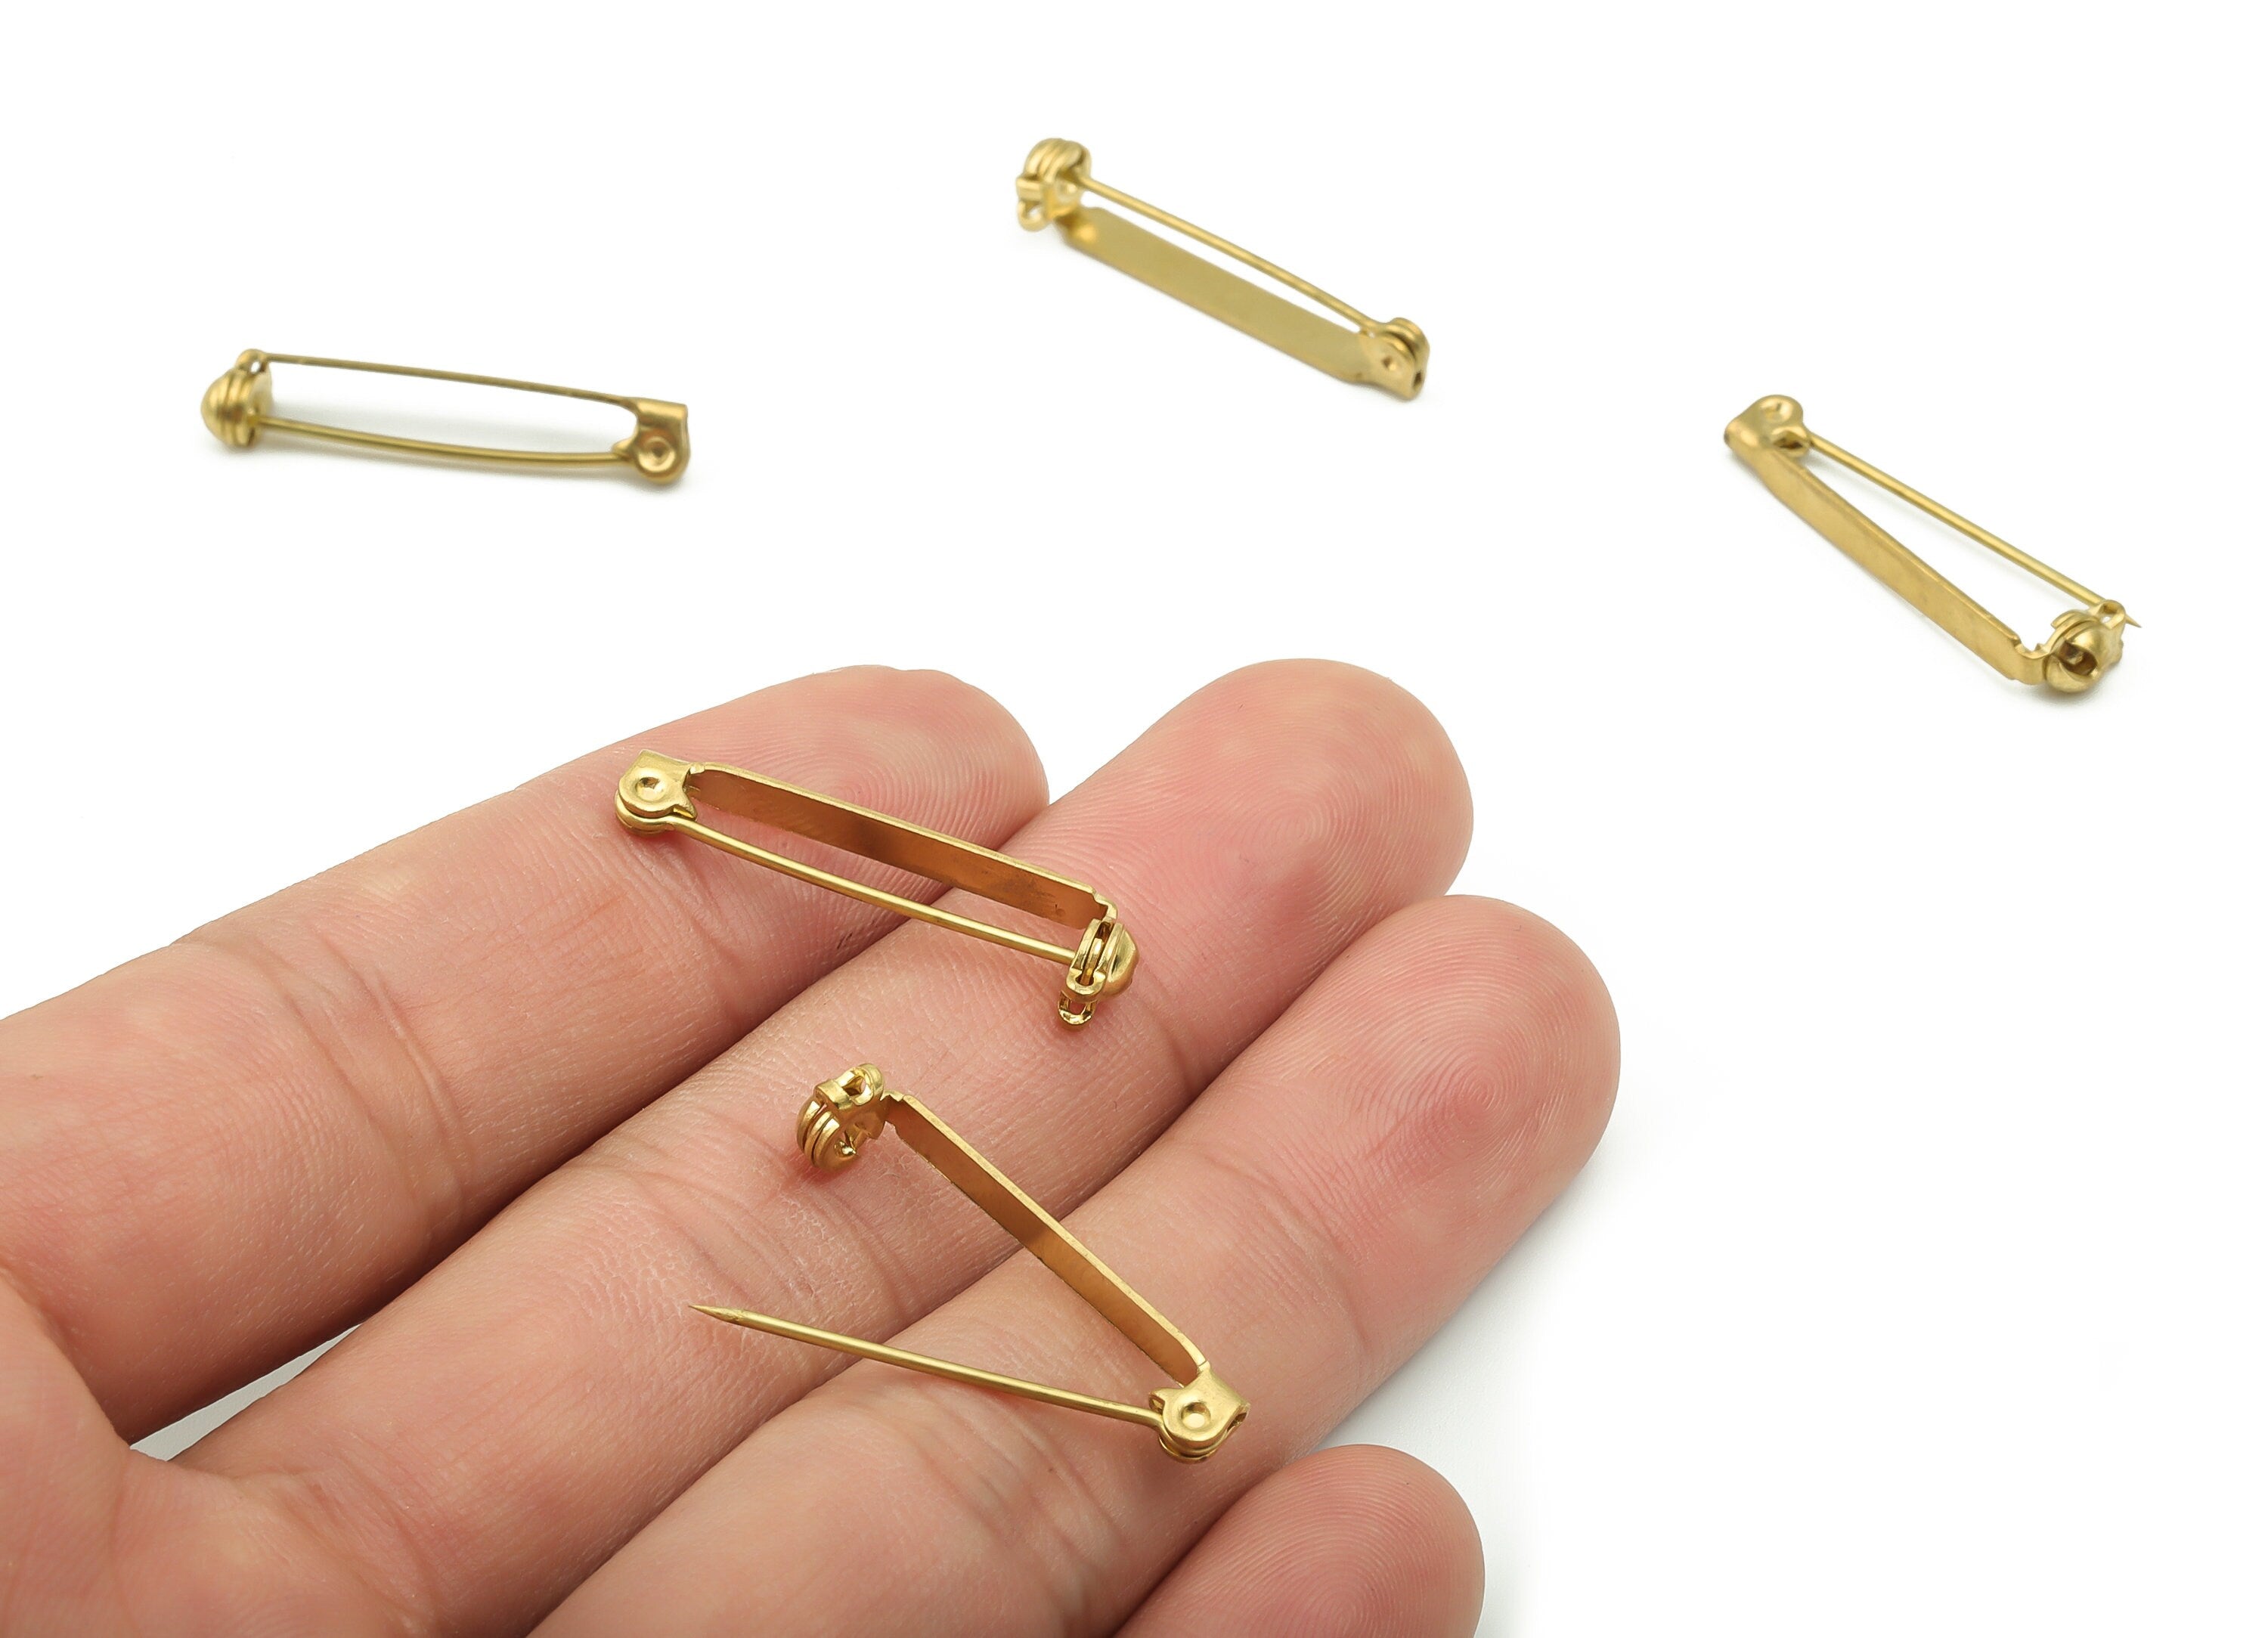 Jewelry Making Accessories, Safety Pins Brooch, Jewelry Findings